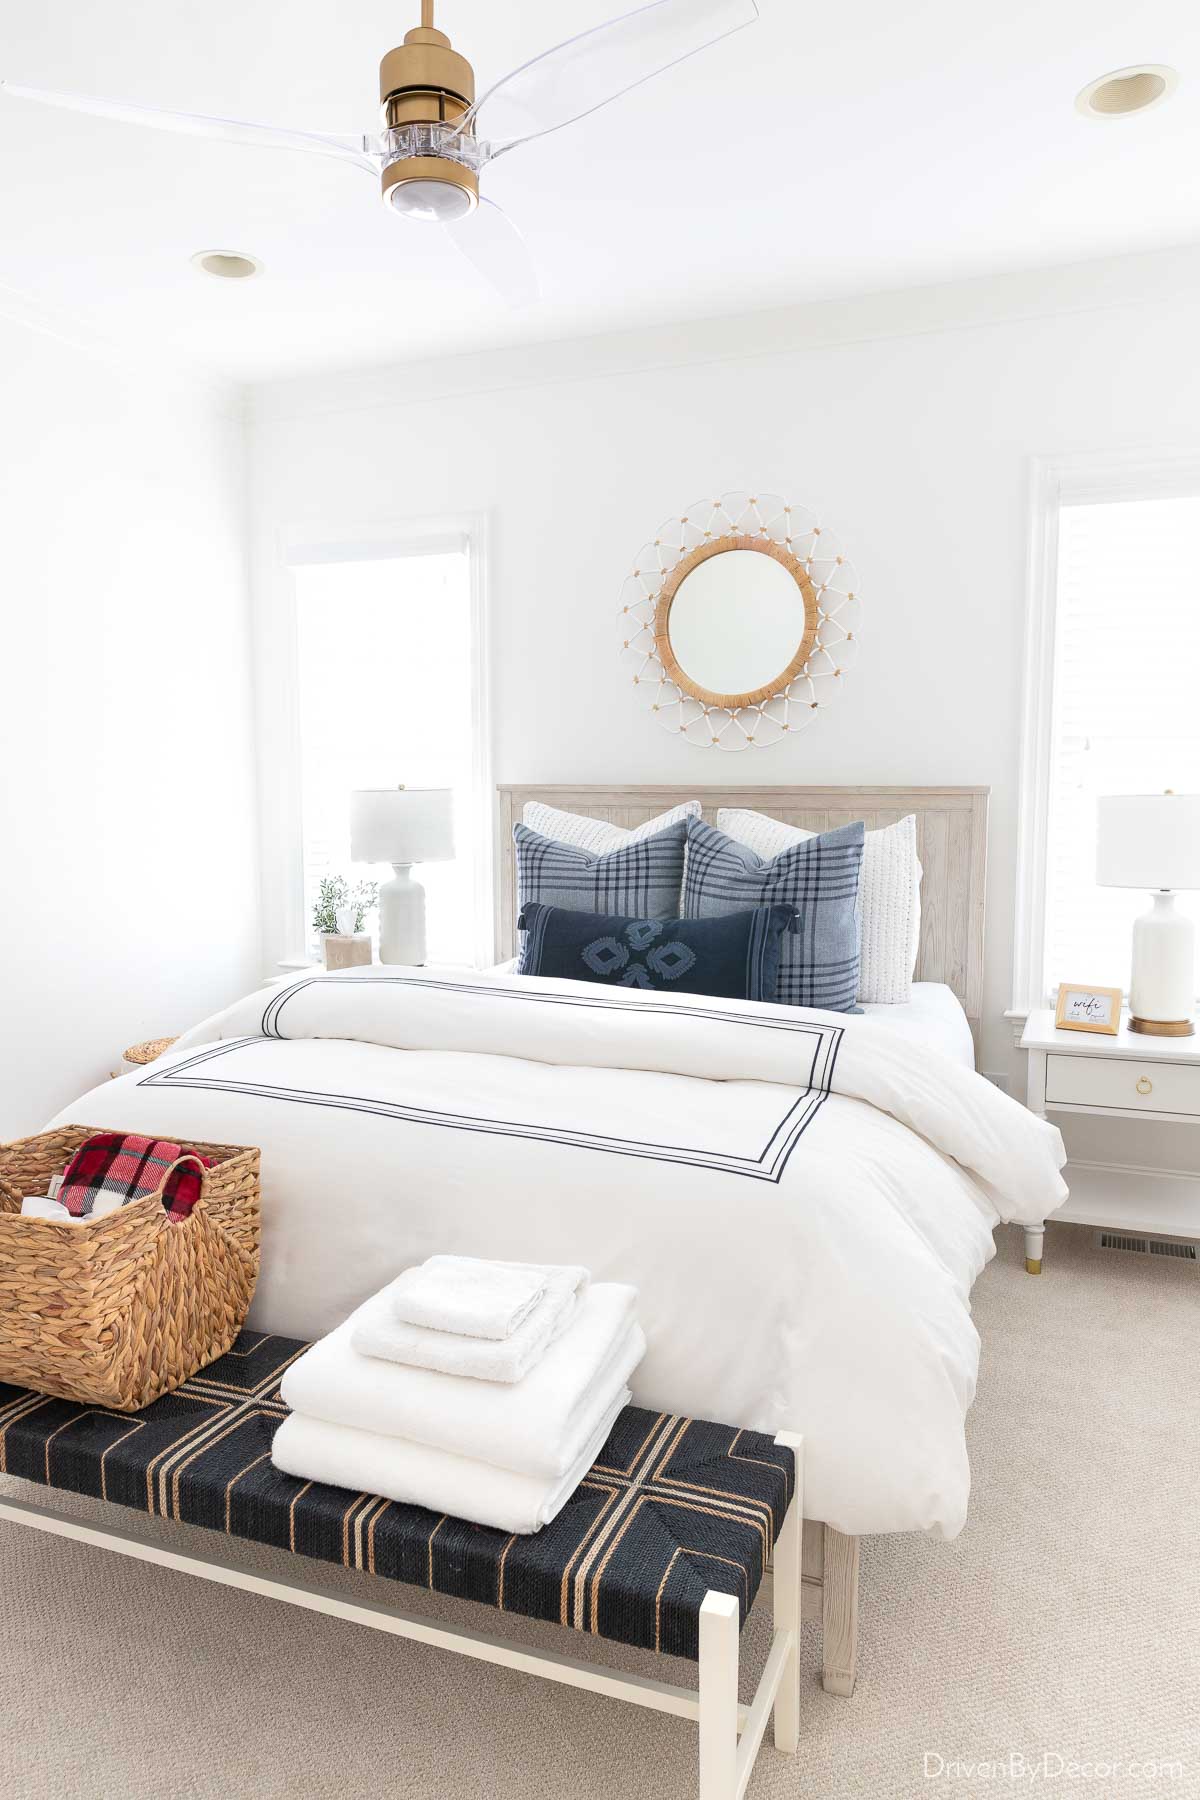 Guest bedroom decorated with shades of blue